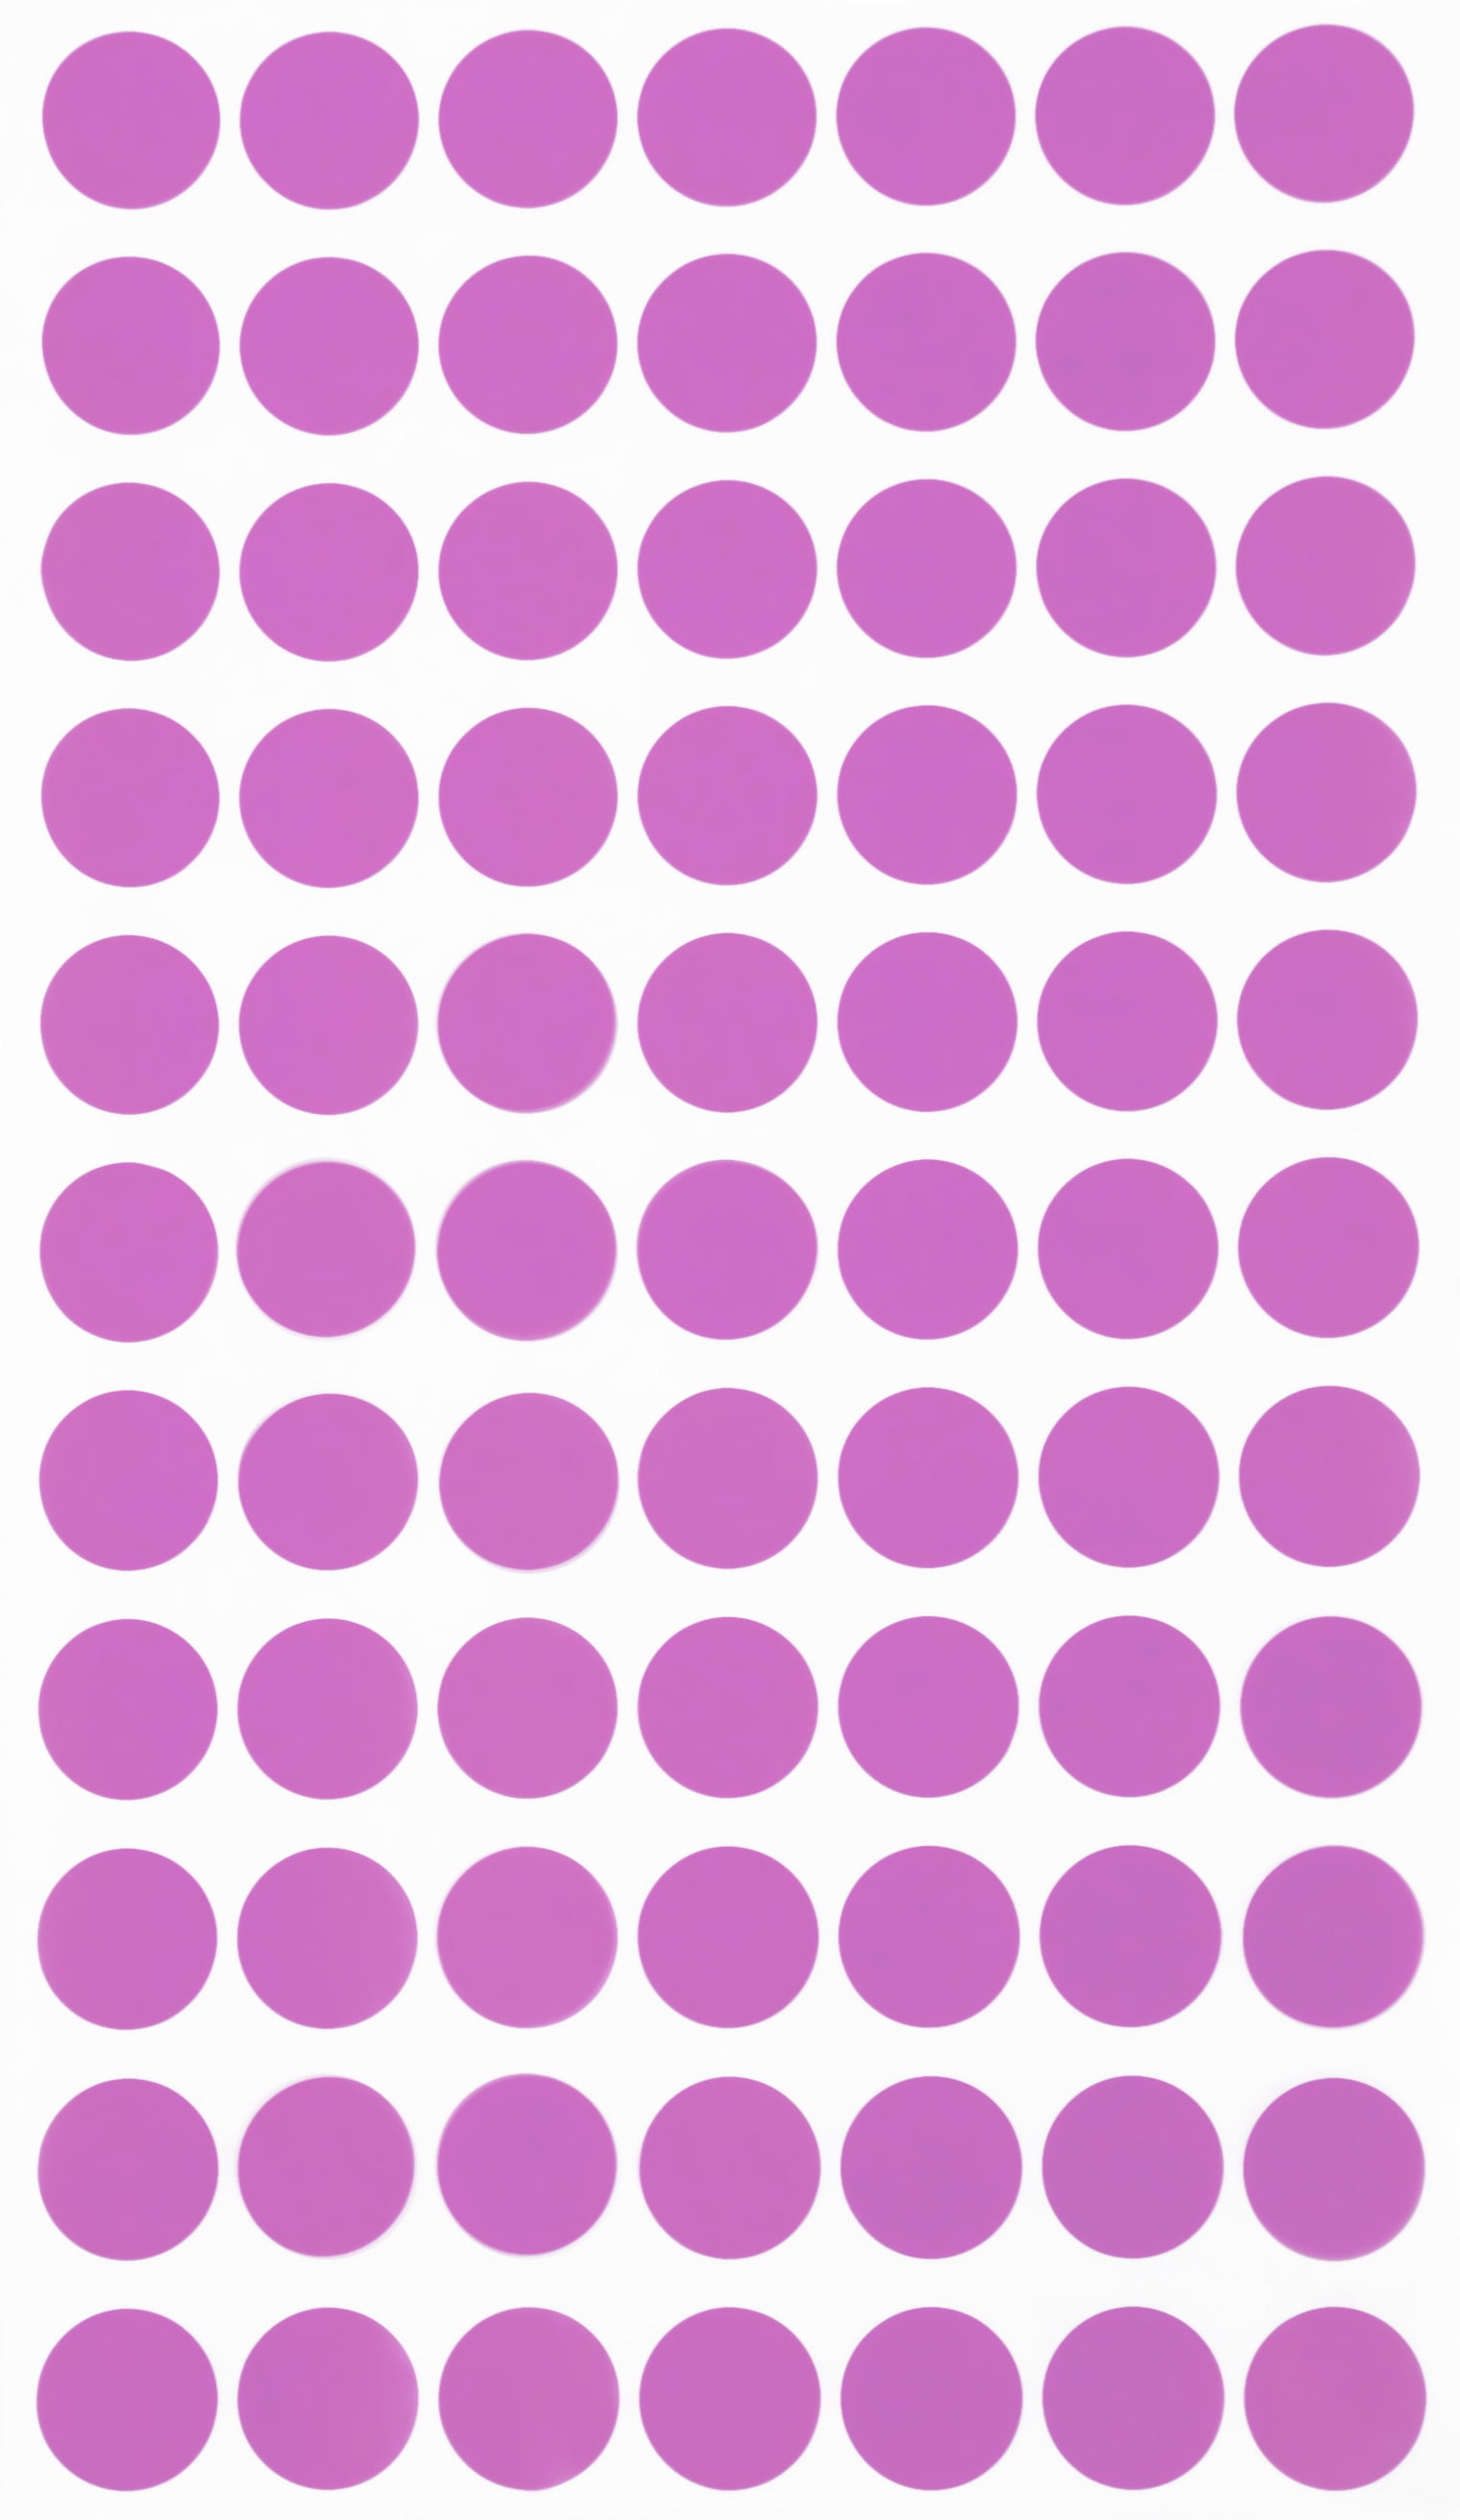 100 Dark Pink 15mm Colour Code Dots Round Stickers Sticky ID Labels 1/2 Inch 